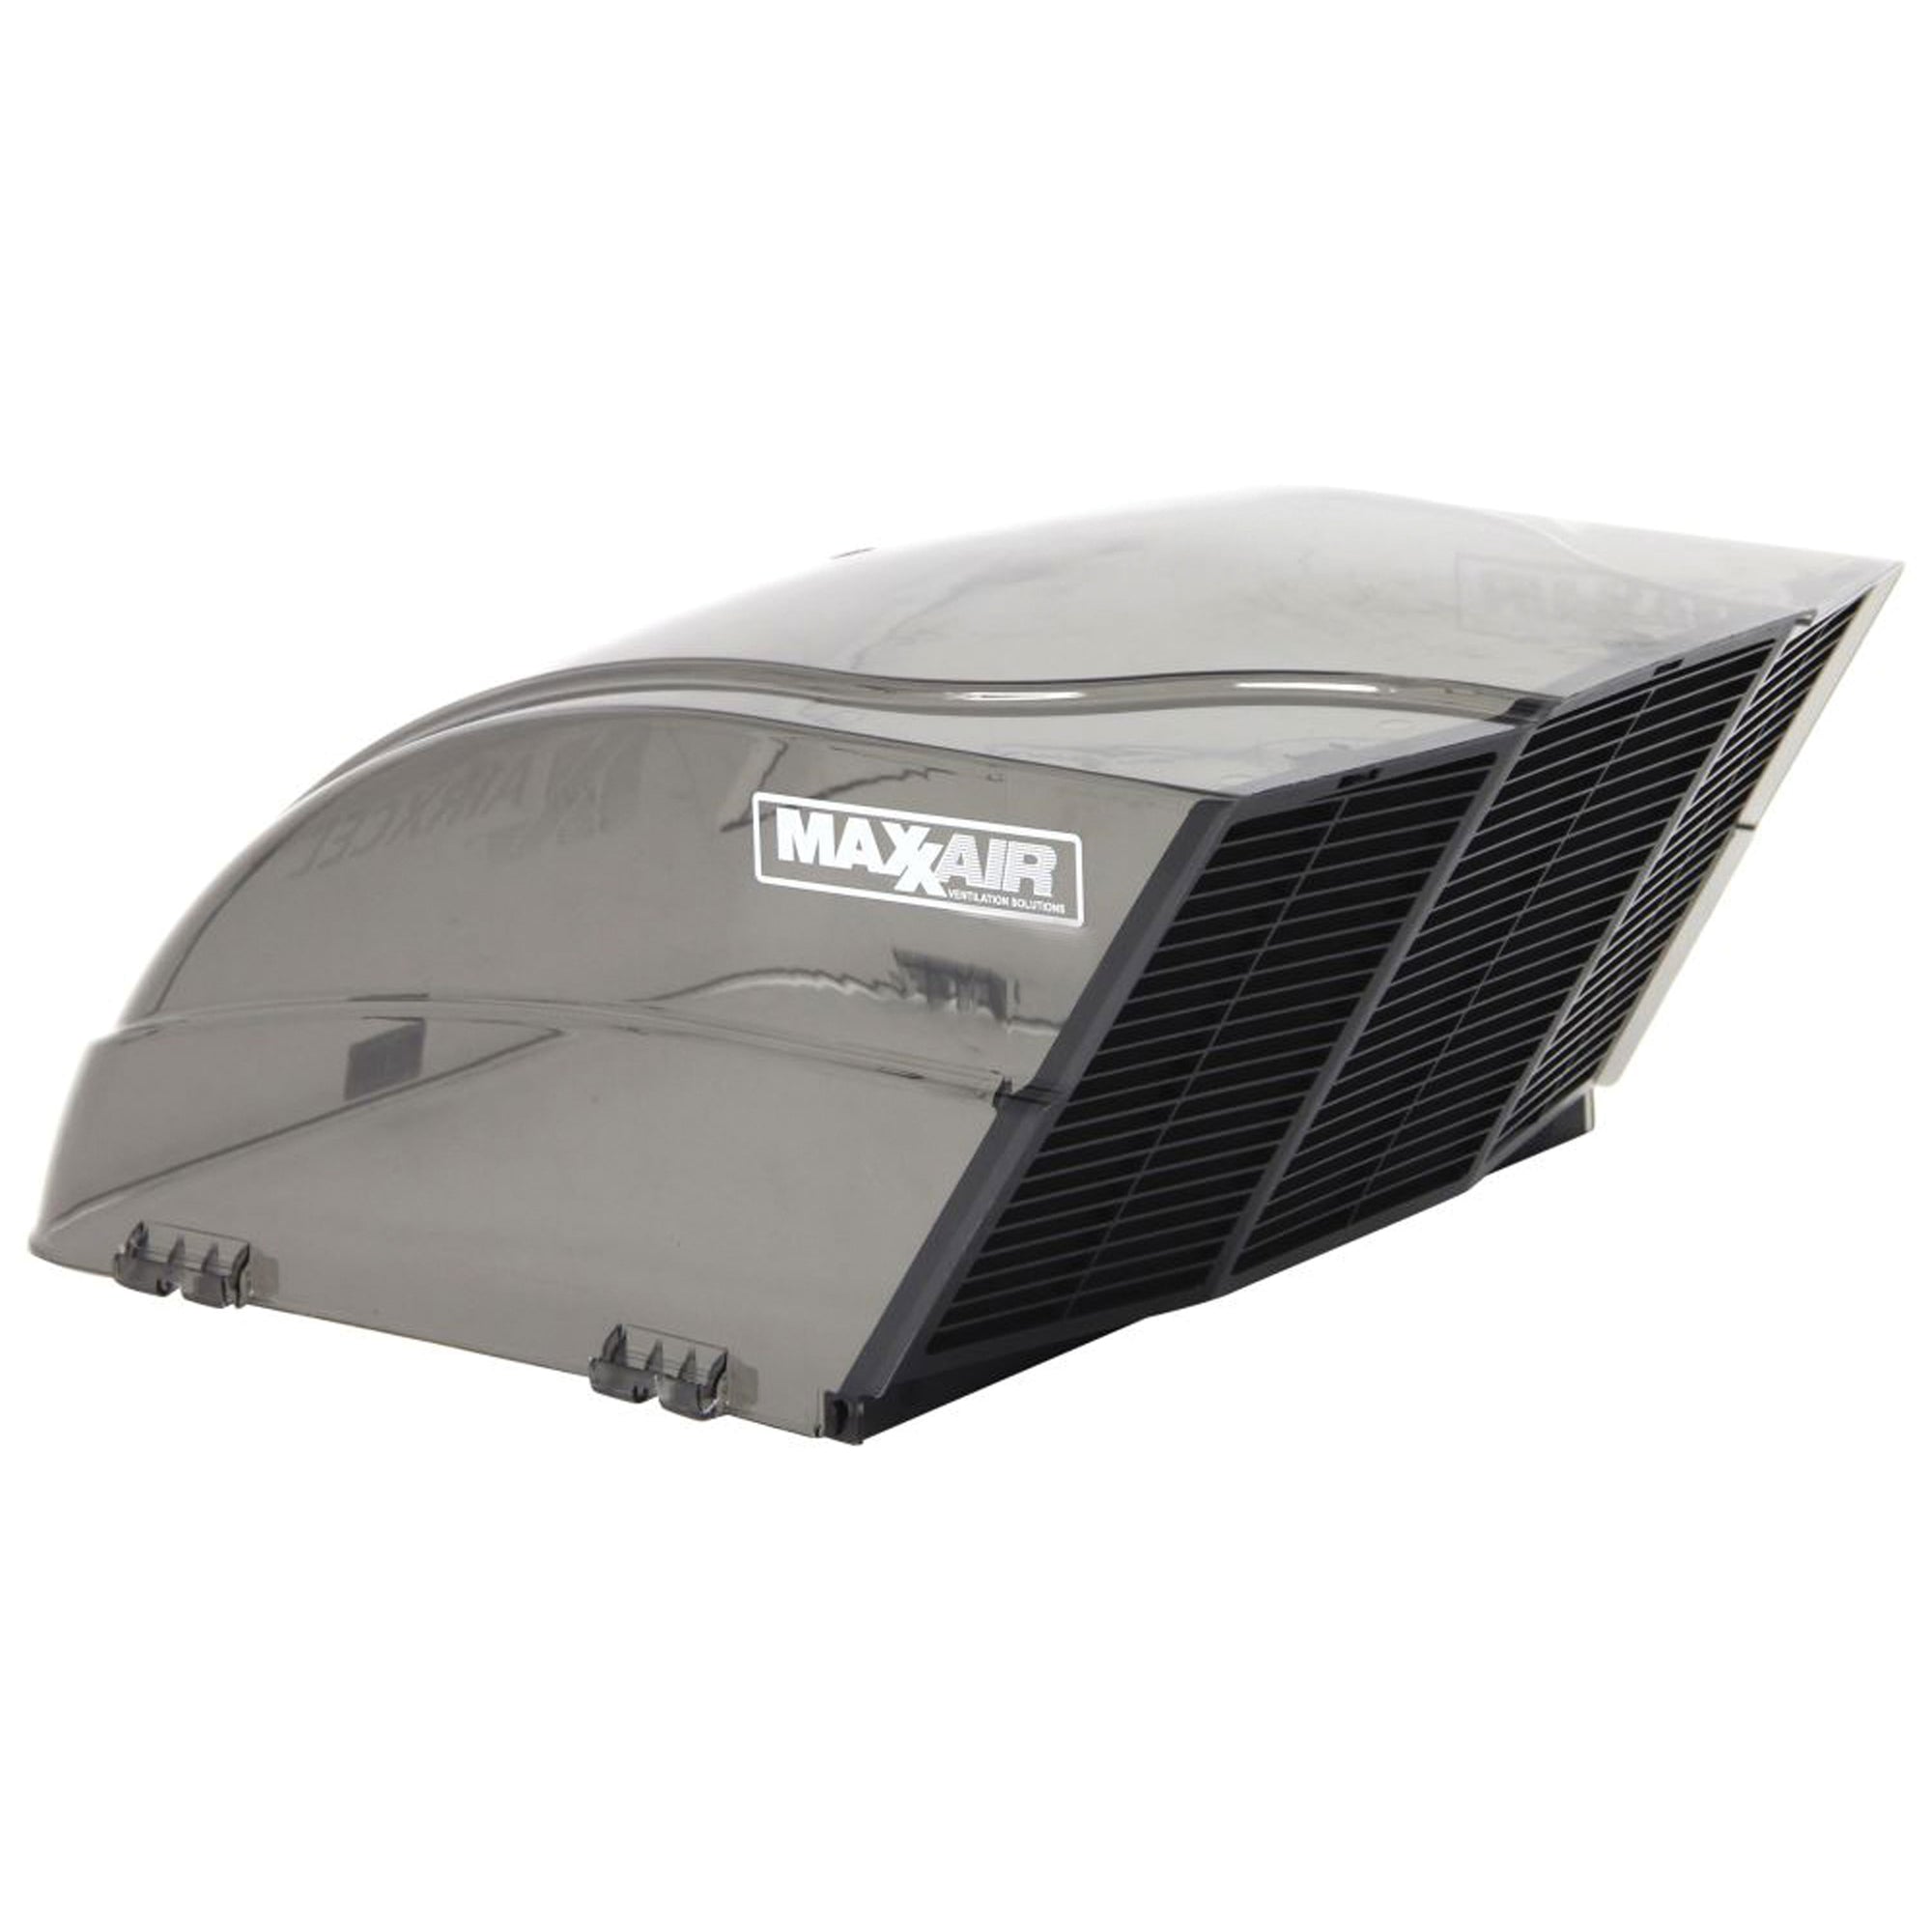 MAXXAIR 00-955003 Fanmate Vent and Fan